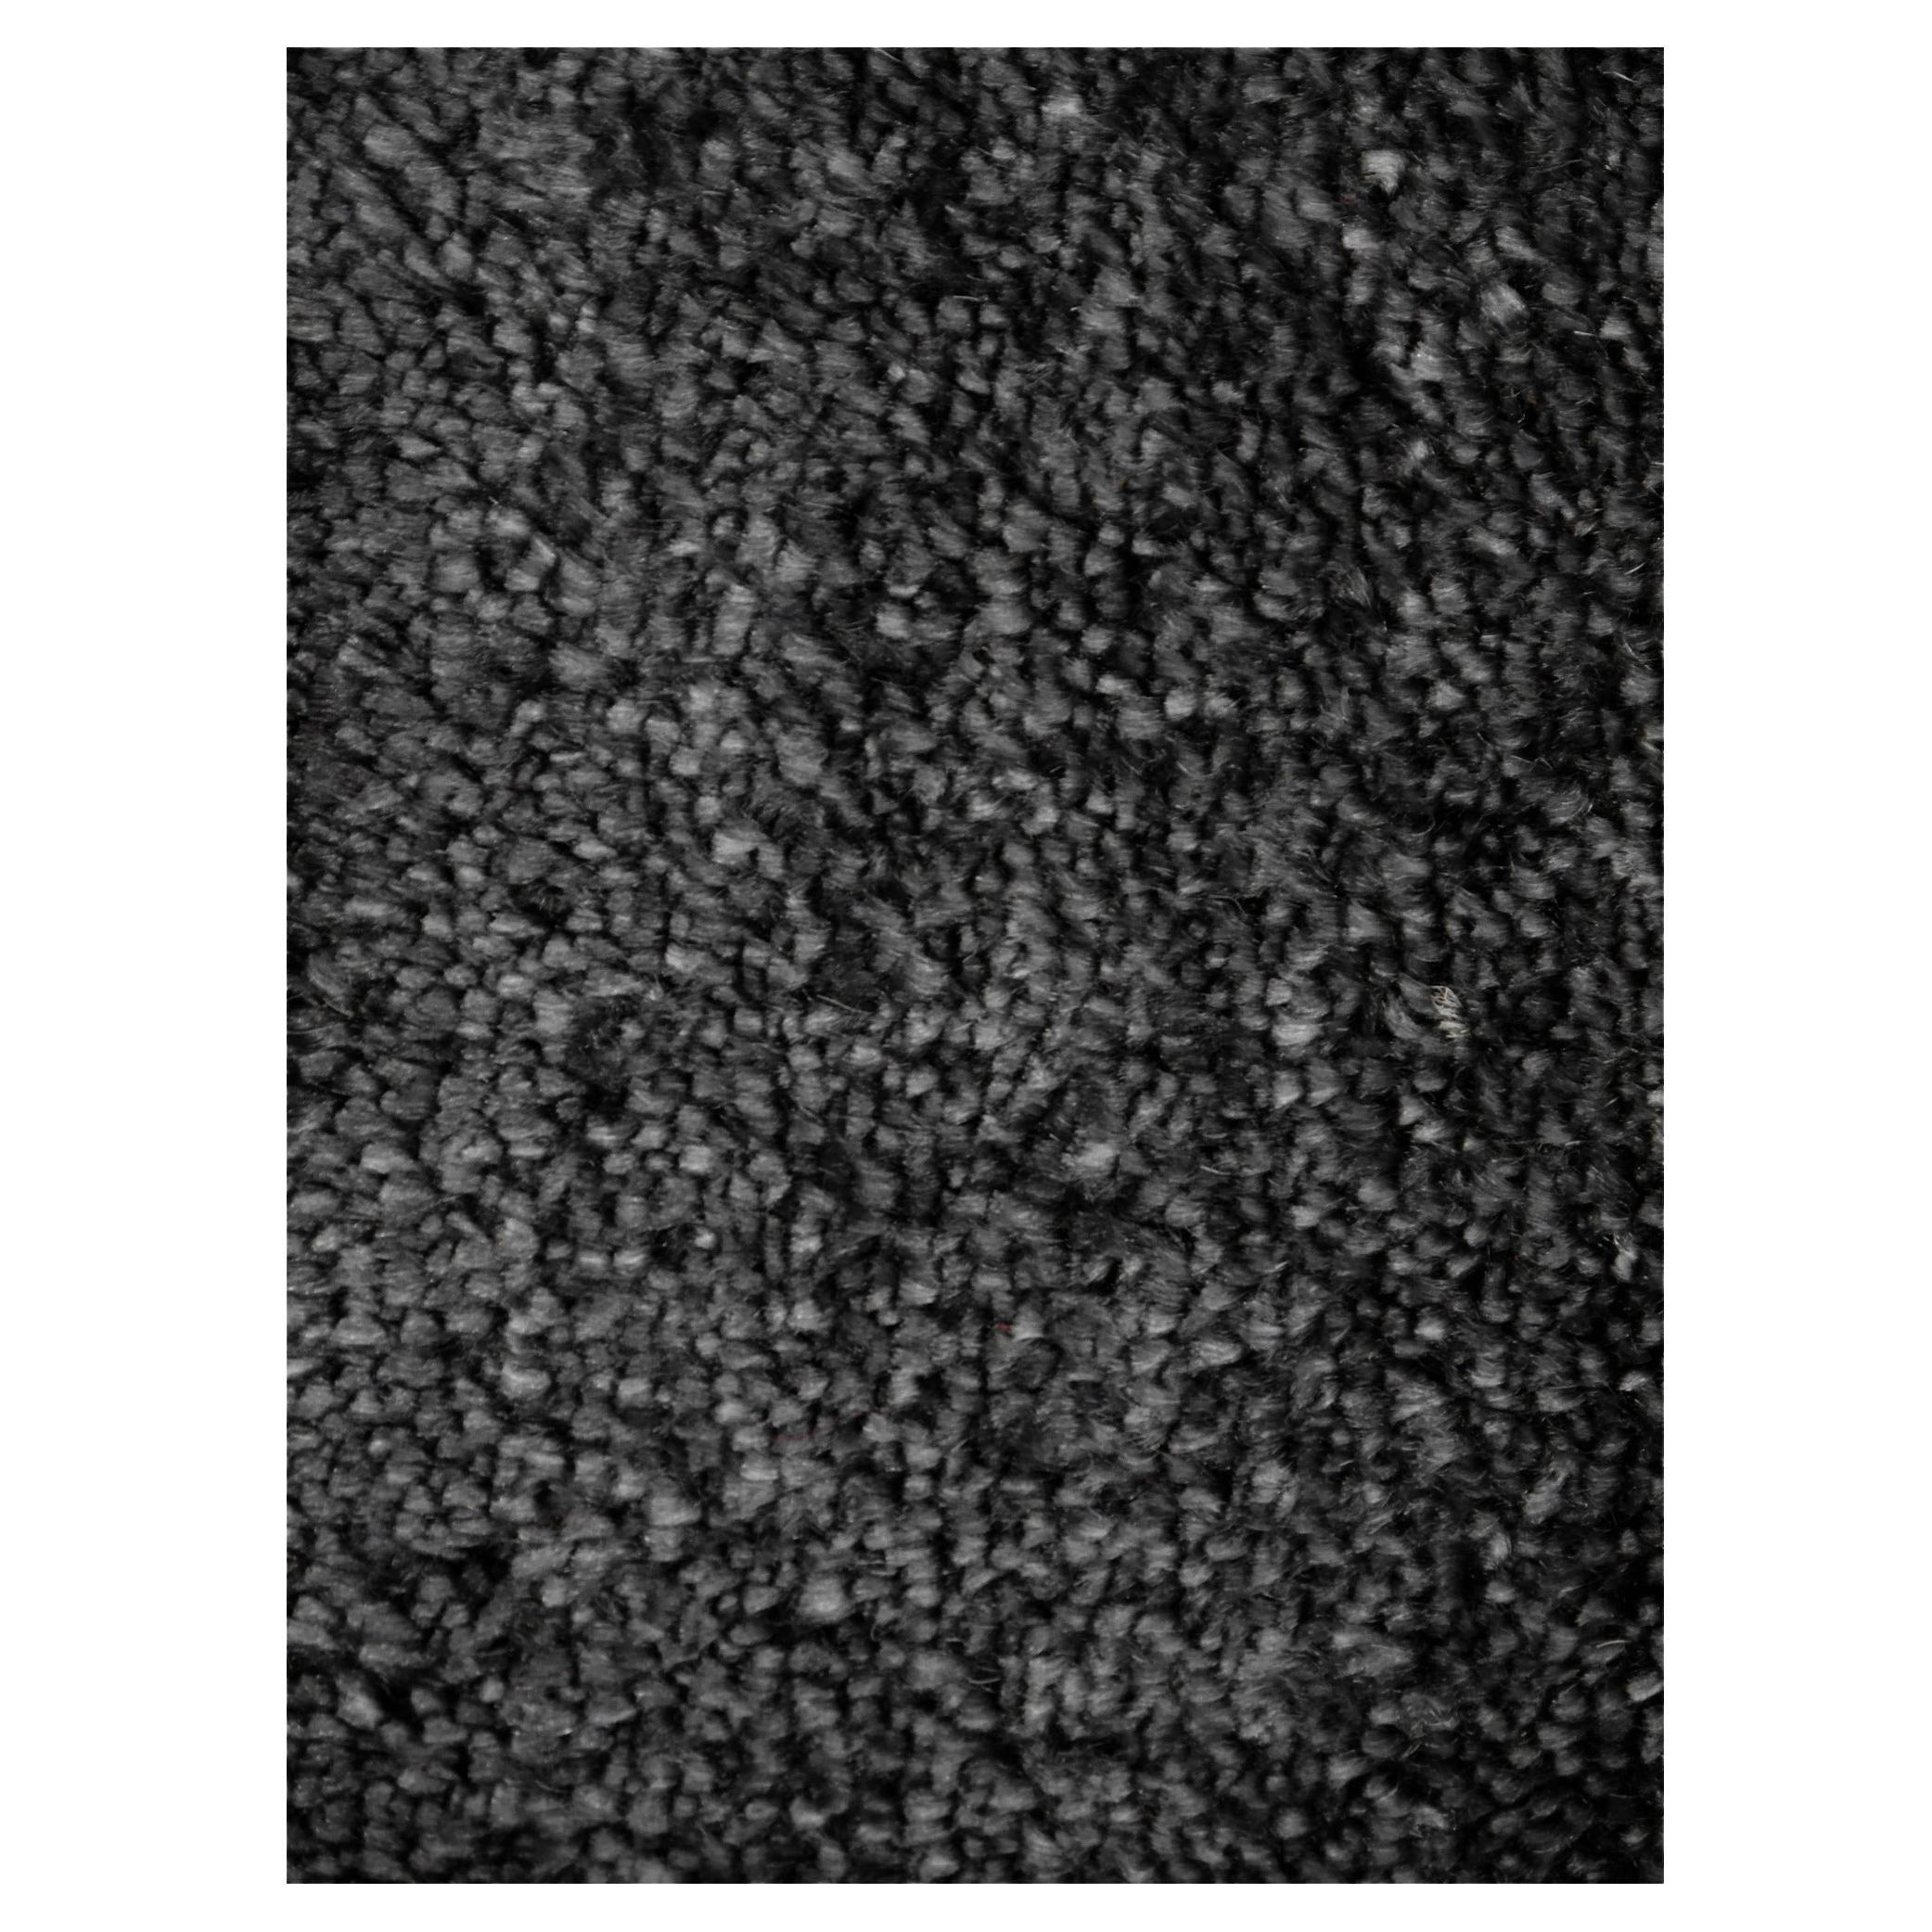 Mohair Luxury Rug Hand Knotted in Charcoal Black by Djoharian Collection 